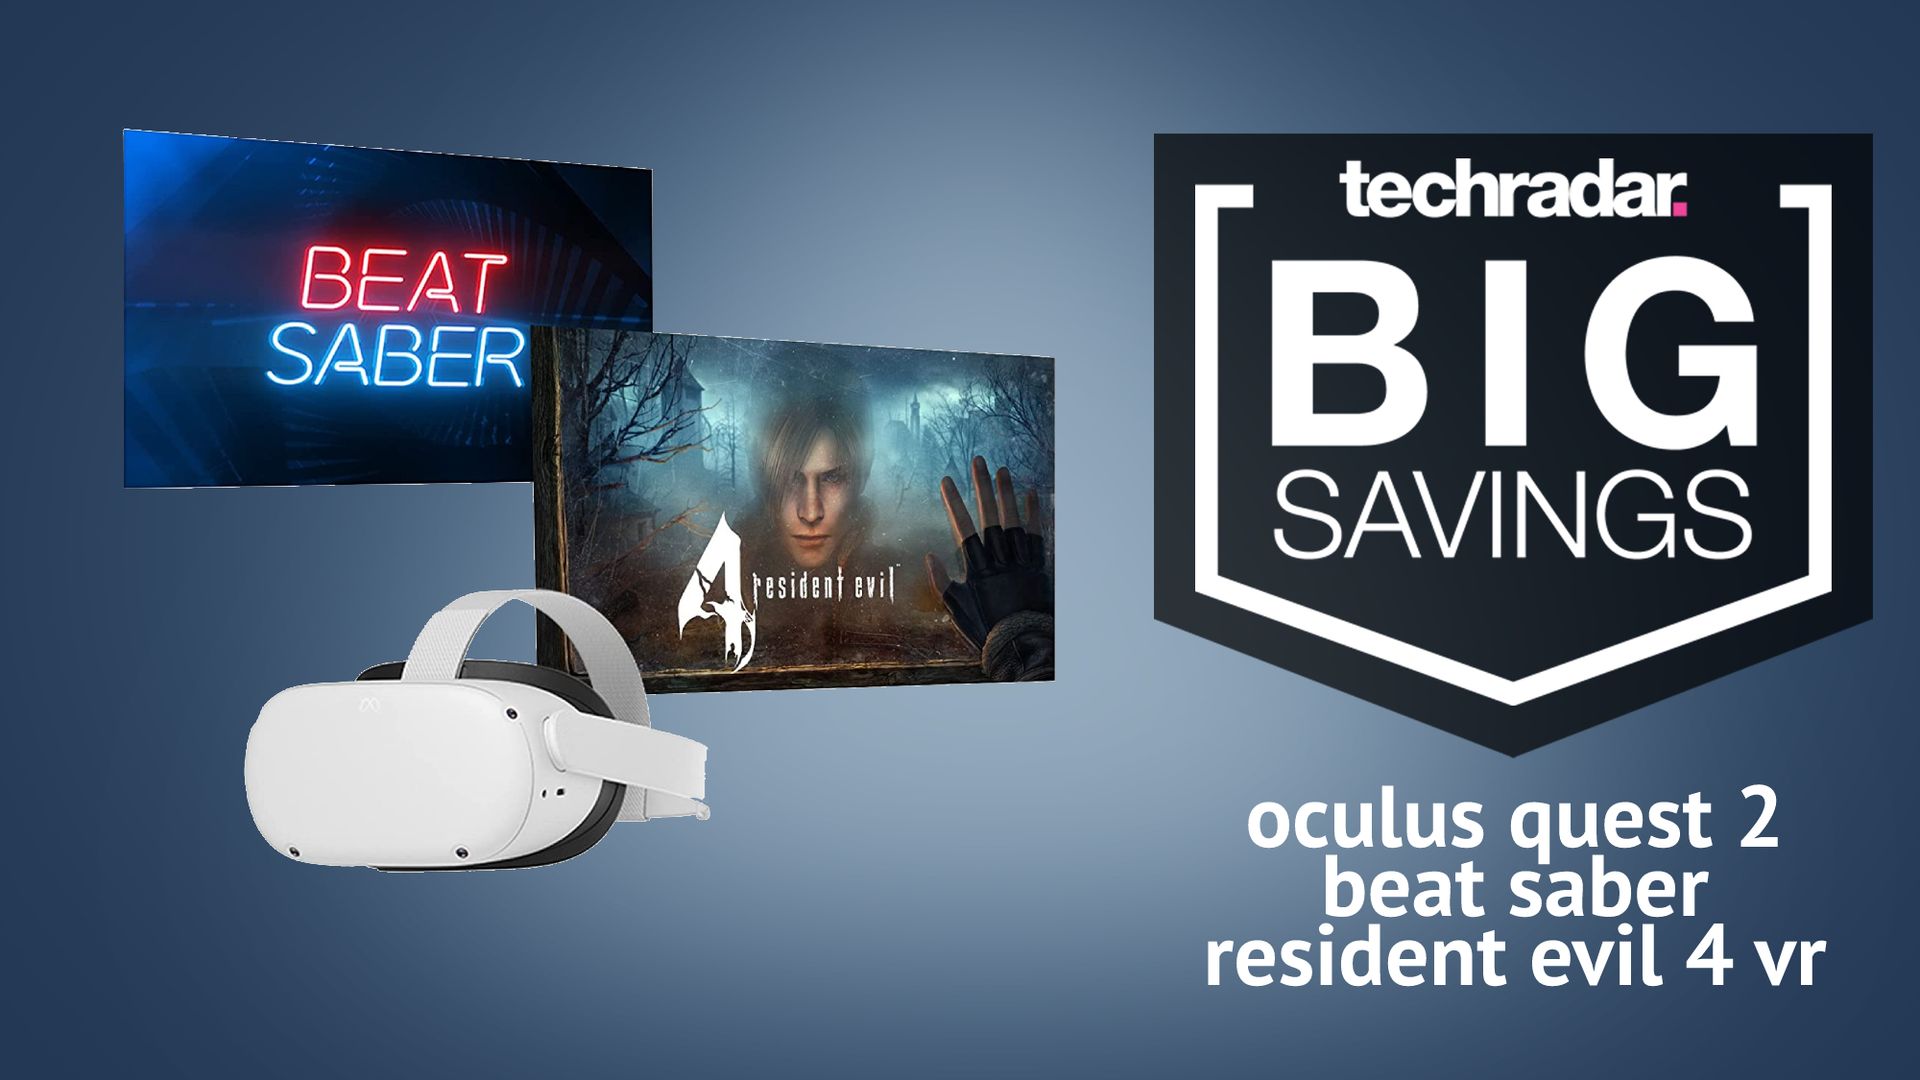 Oculus Quest 2 Black Friday deal includes two top VR games TechRadar